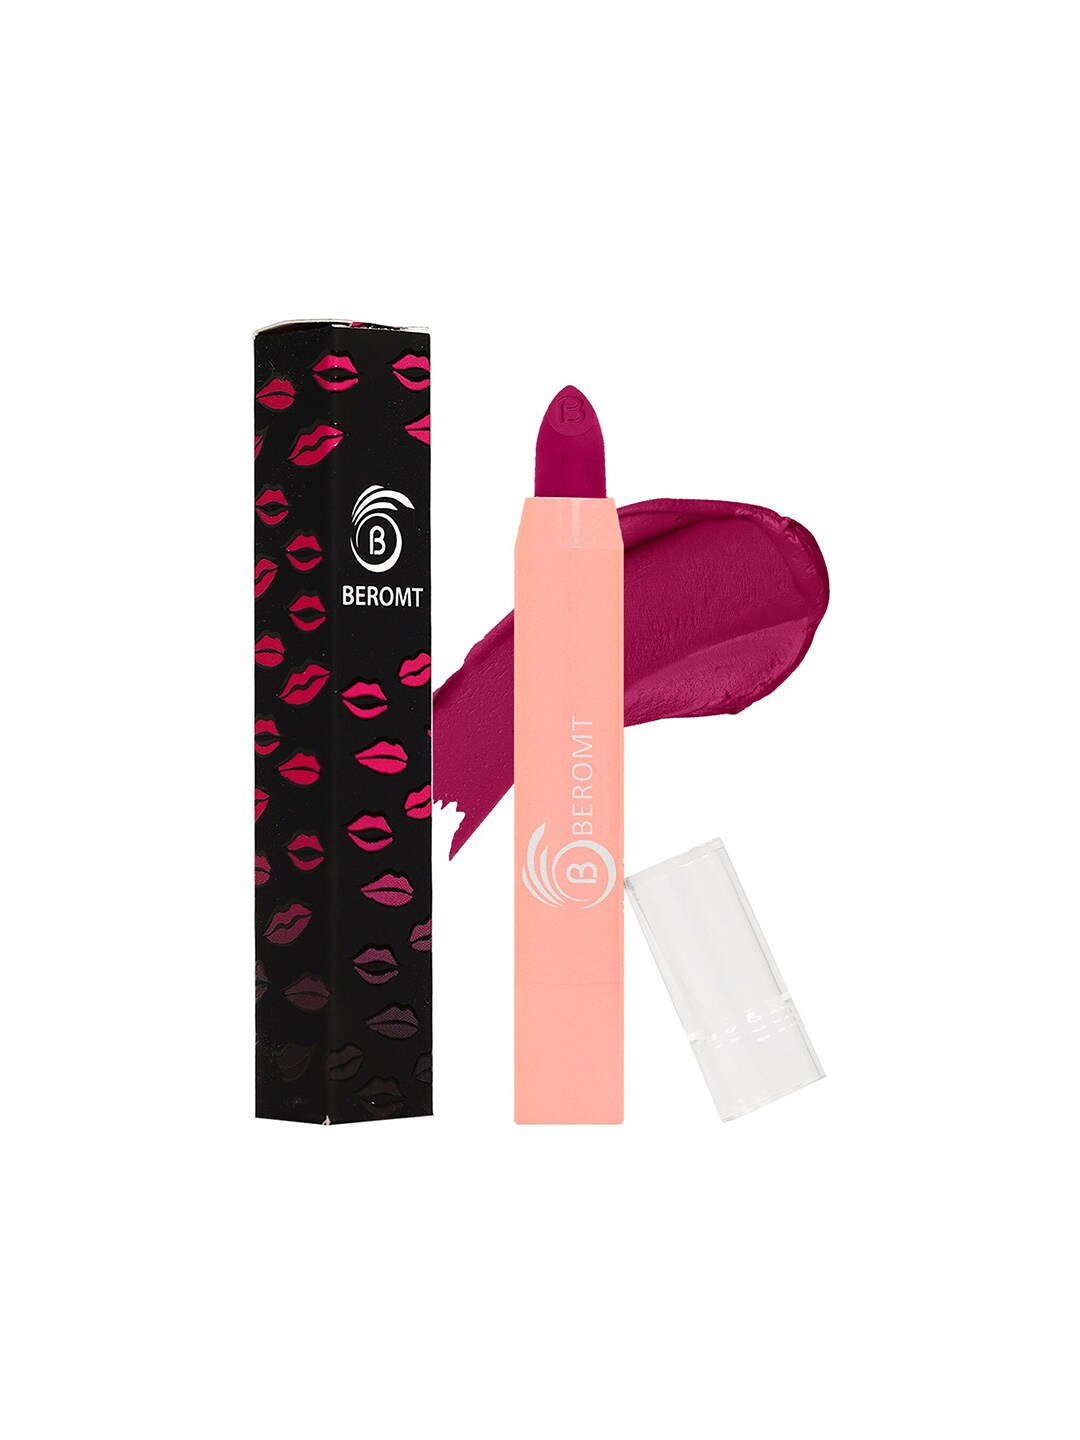 BEROMT Perfect Pout Matte Crayon Lipstick - Warm Tone Red 3gm Price in India